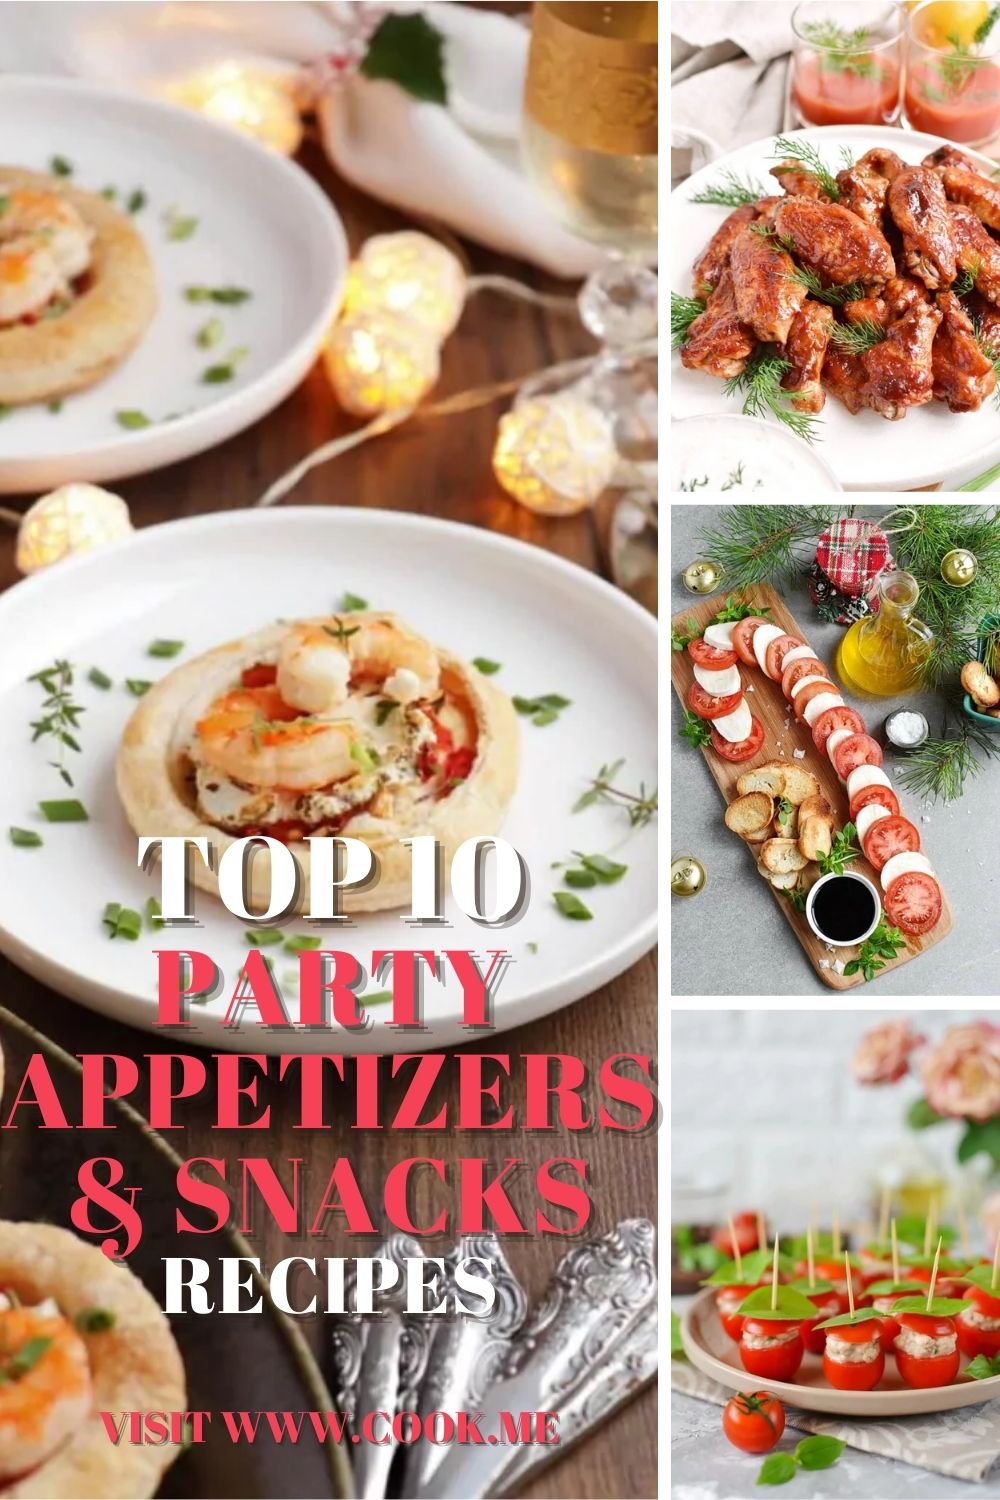 TOP 10 Party Appetizers & Snacks - Cook.me Recipes